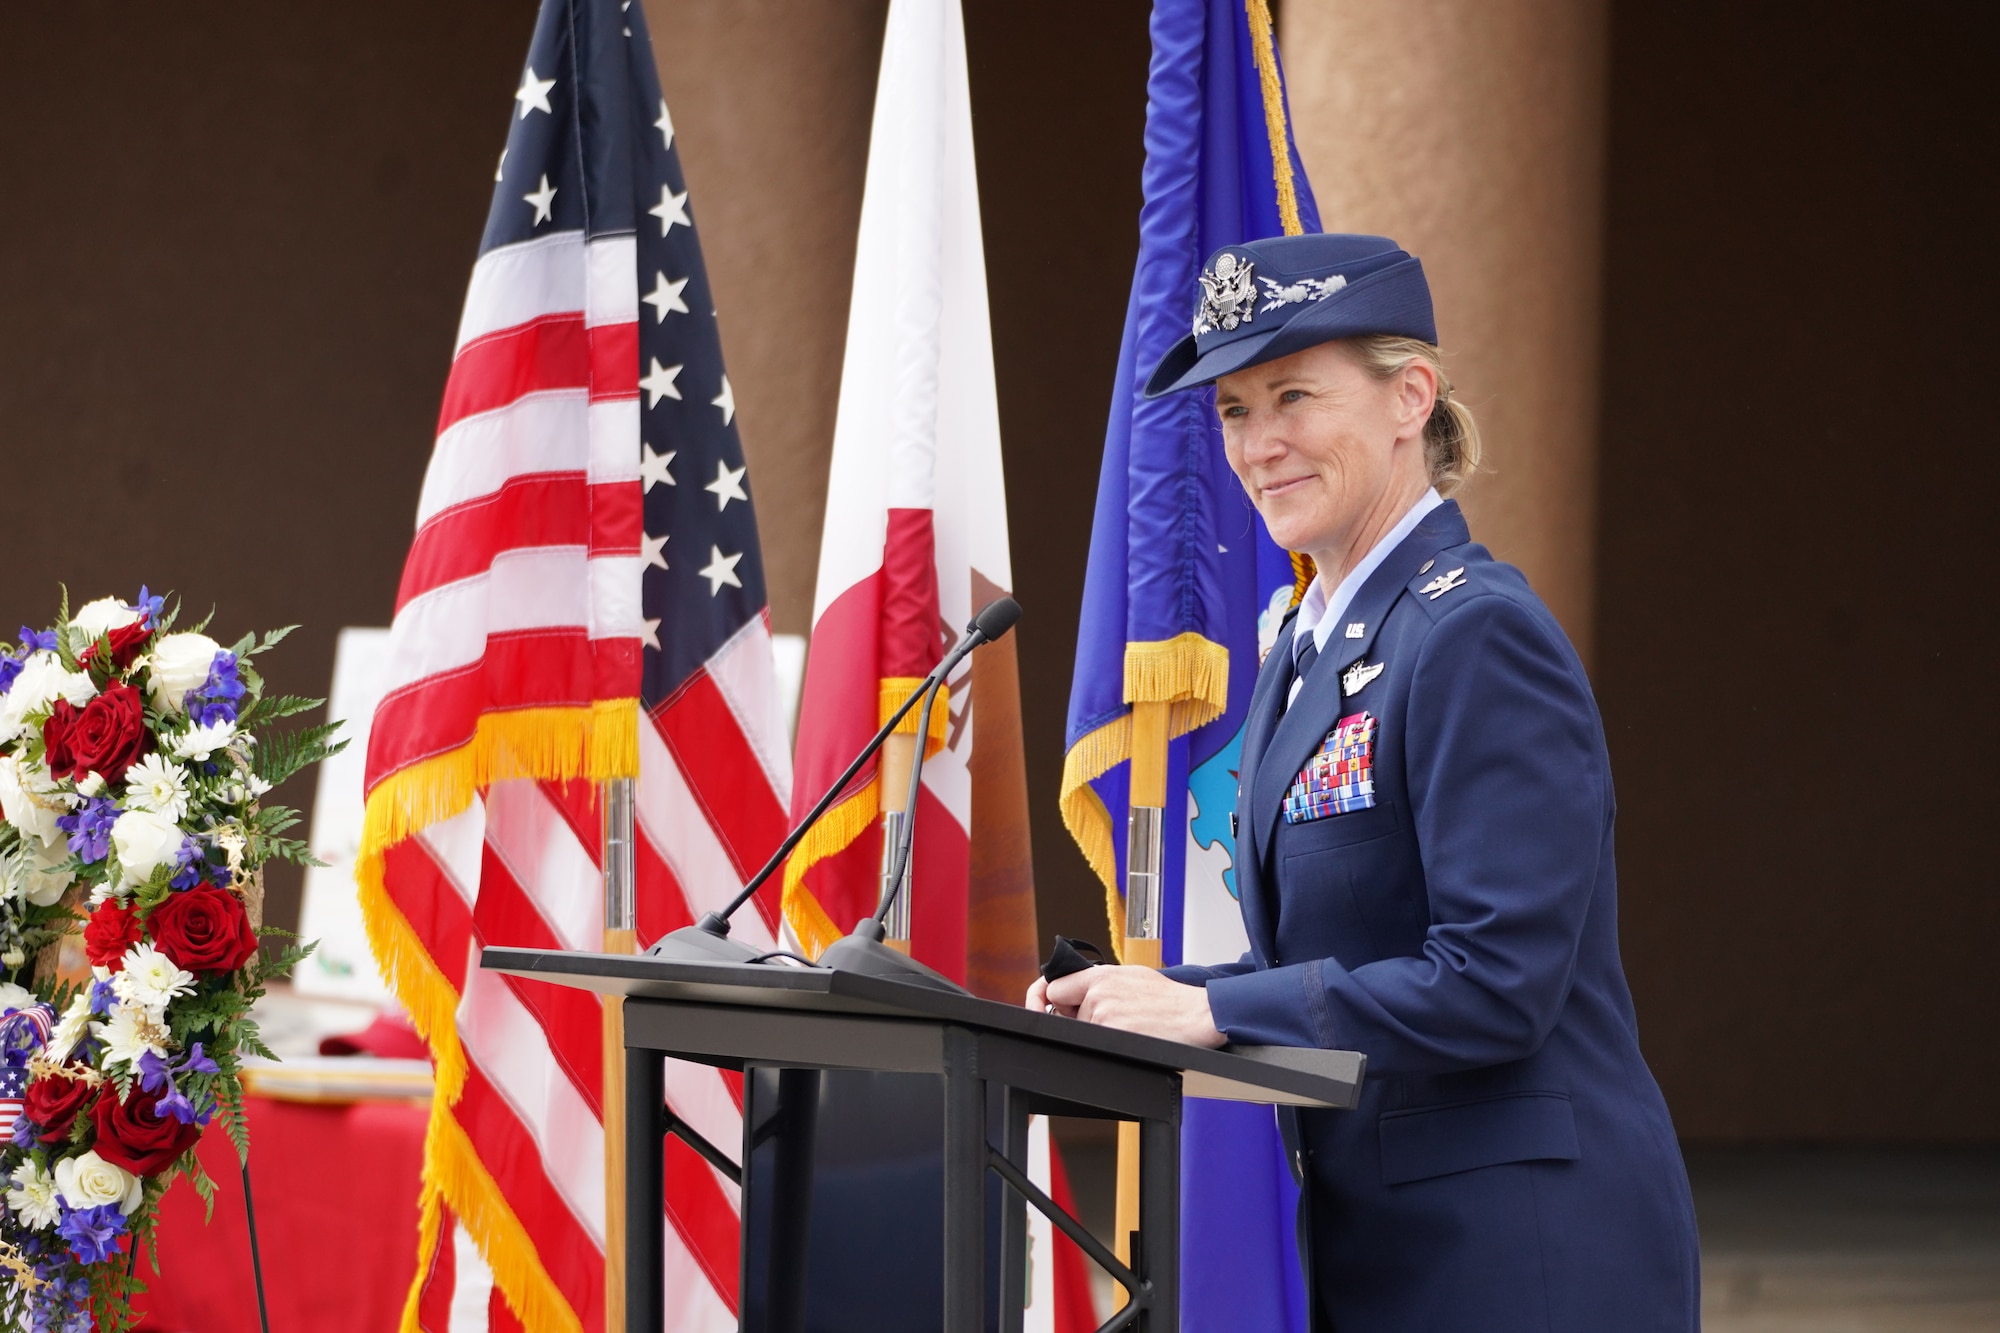 The commander of the 146th Airlift Wing speaks to a crowd at a memorial service.